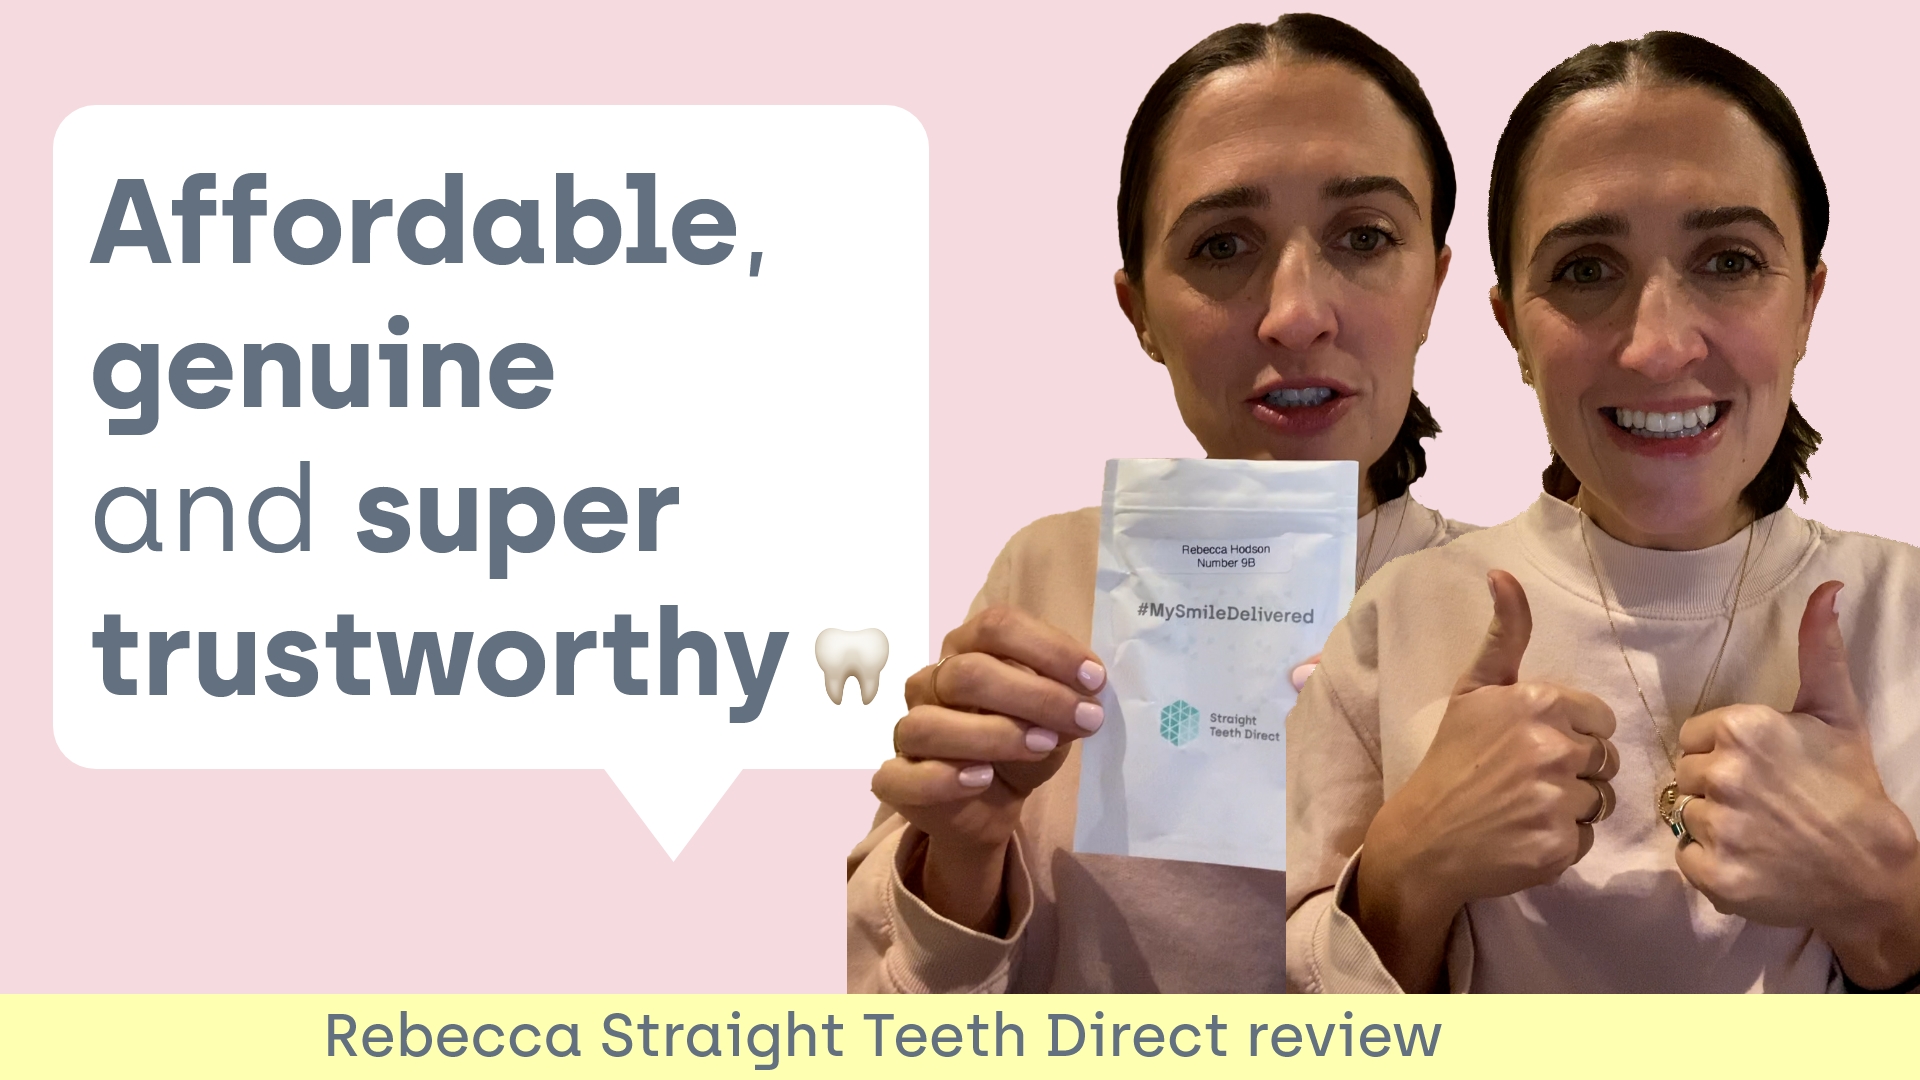 Do clear aligners work? Rebecca review